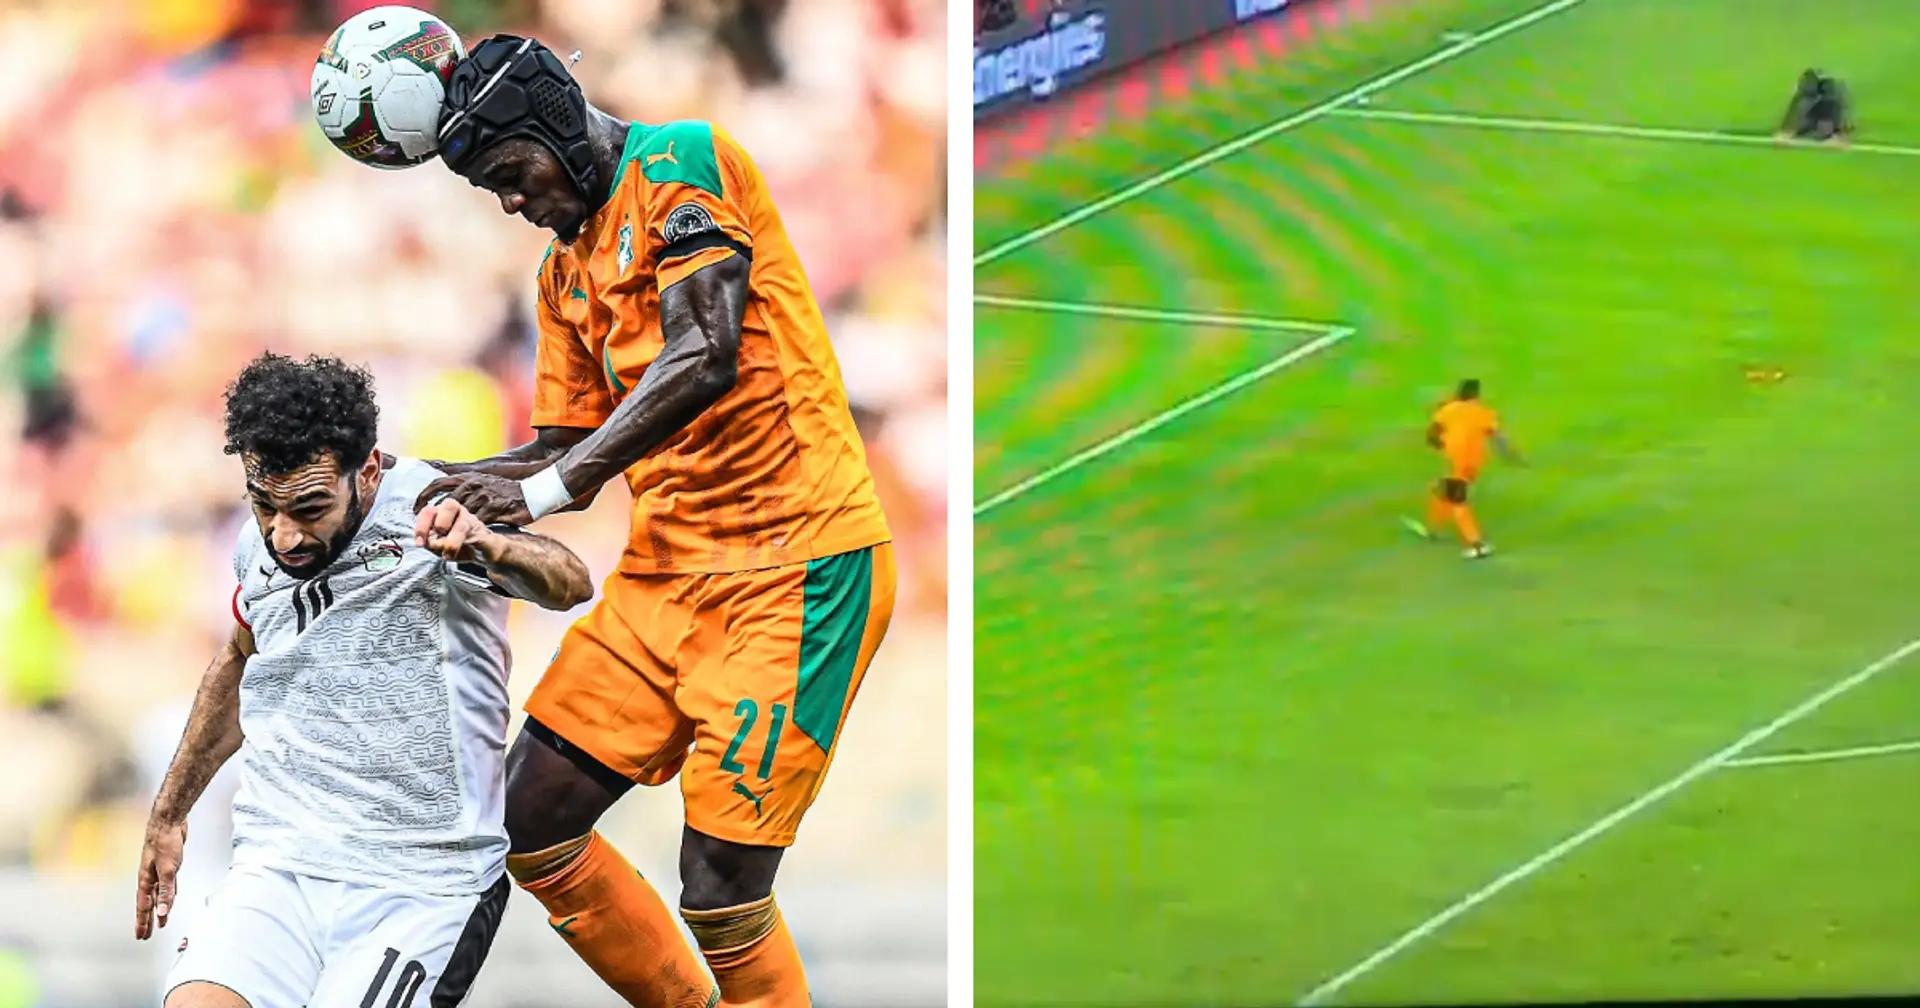 Ivory Coast out of AFCON after Eric Bailly's misses no-look chipped attempt in penalty shootout